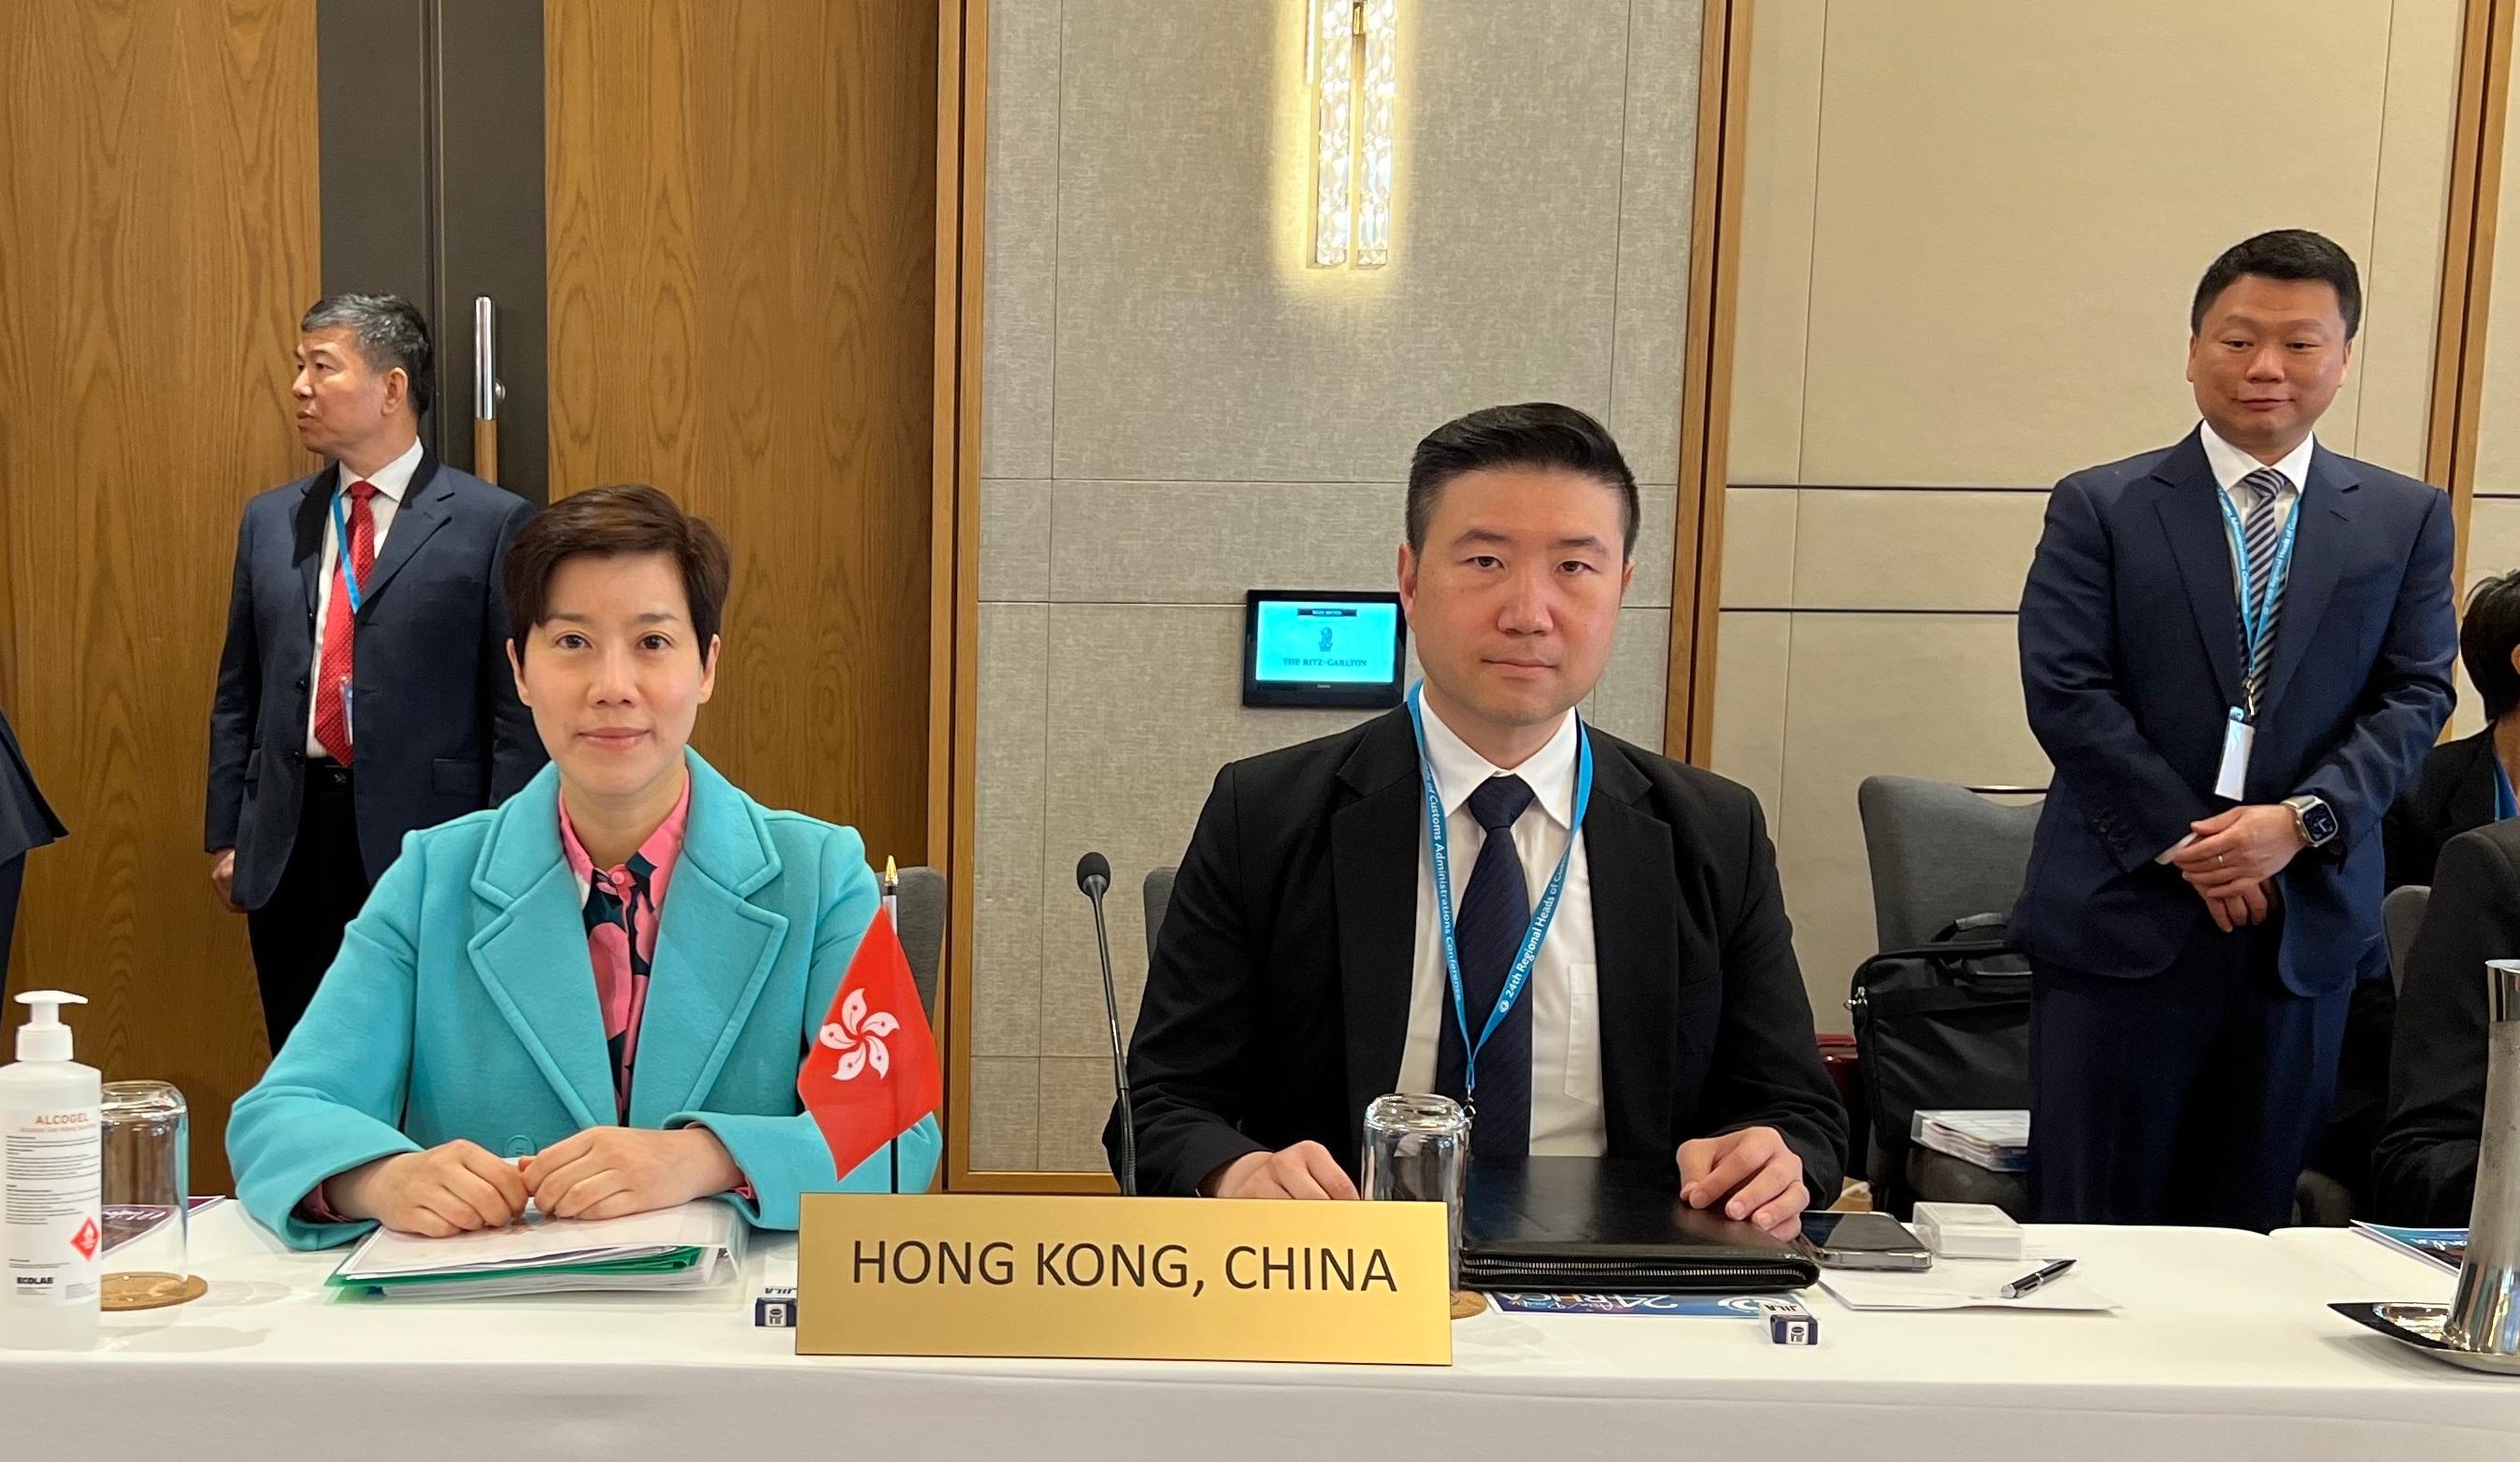 The Commissioner of Customs and Excise, Ms Louise Ho (left), from May 28 to 31, led a delegation to attend the 24th World Customs Organization Asia/Pacific Regional Heads of Customs Administrations Conference in Perth, Australia.